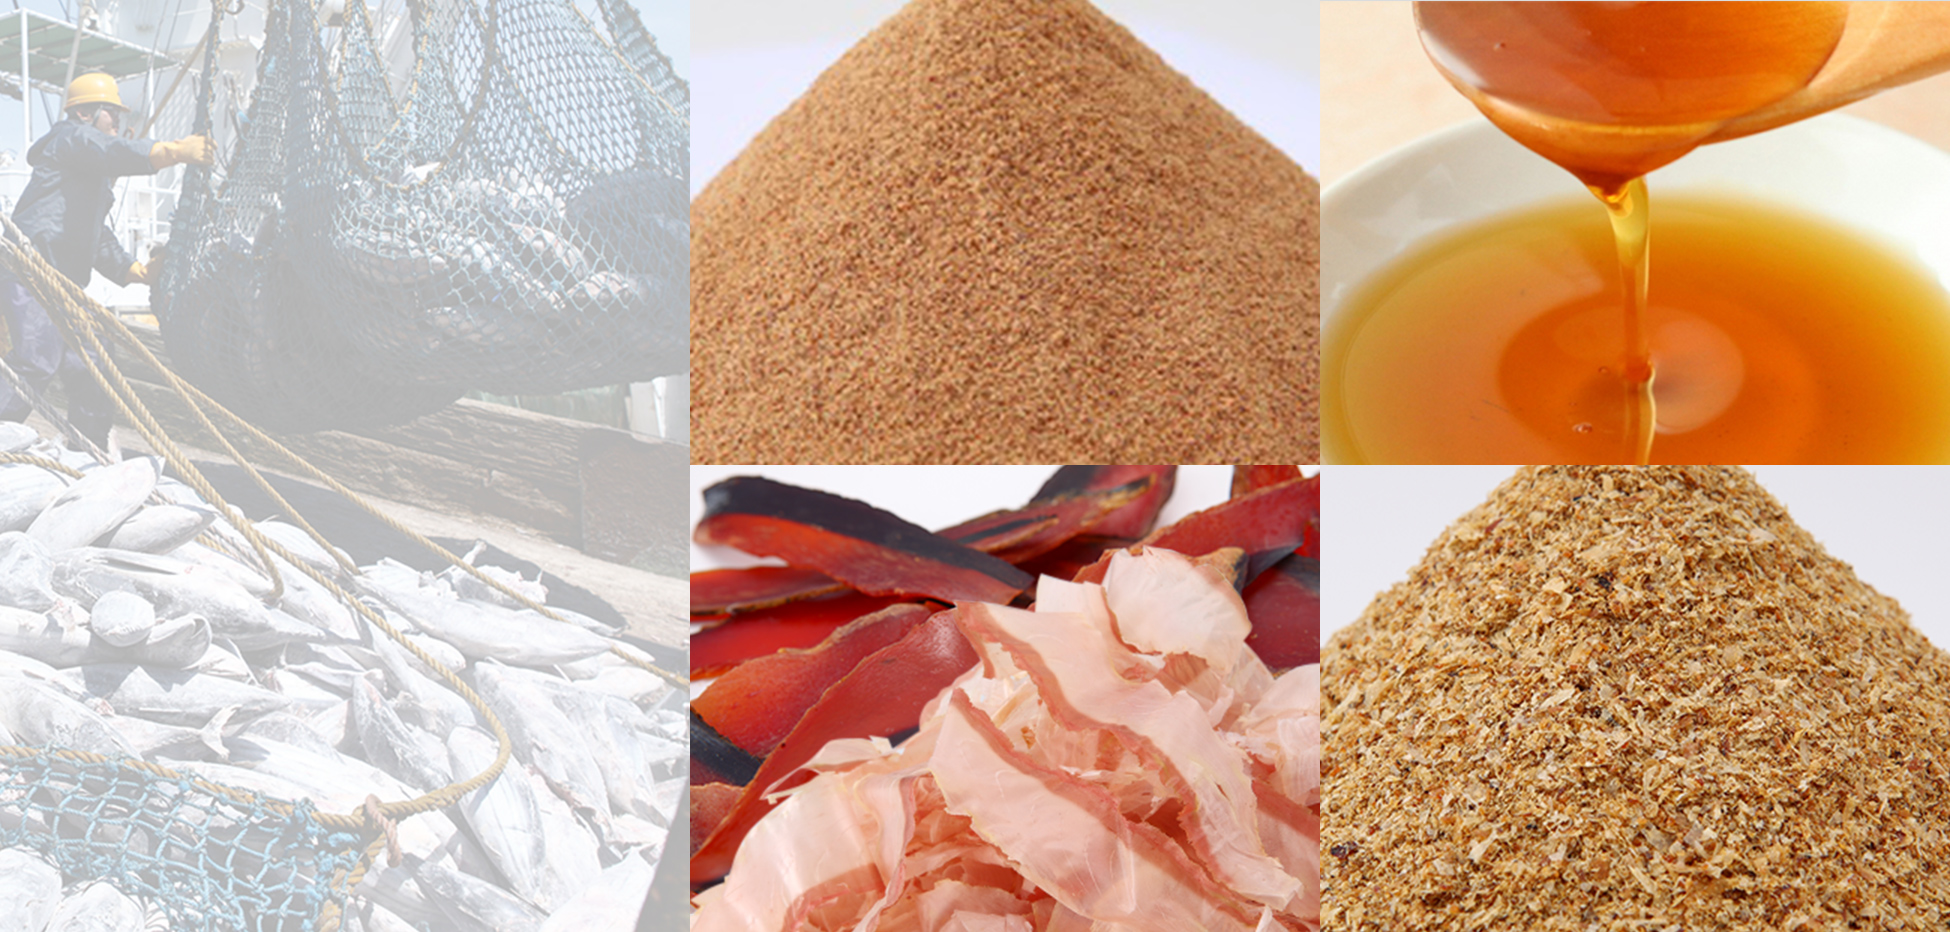 From the perspective of bonito flake manufacturing,processing into powder, shavings, and liquid forms.